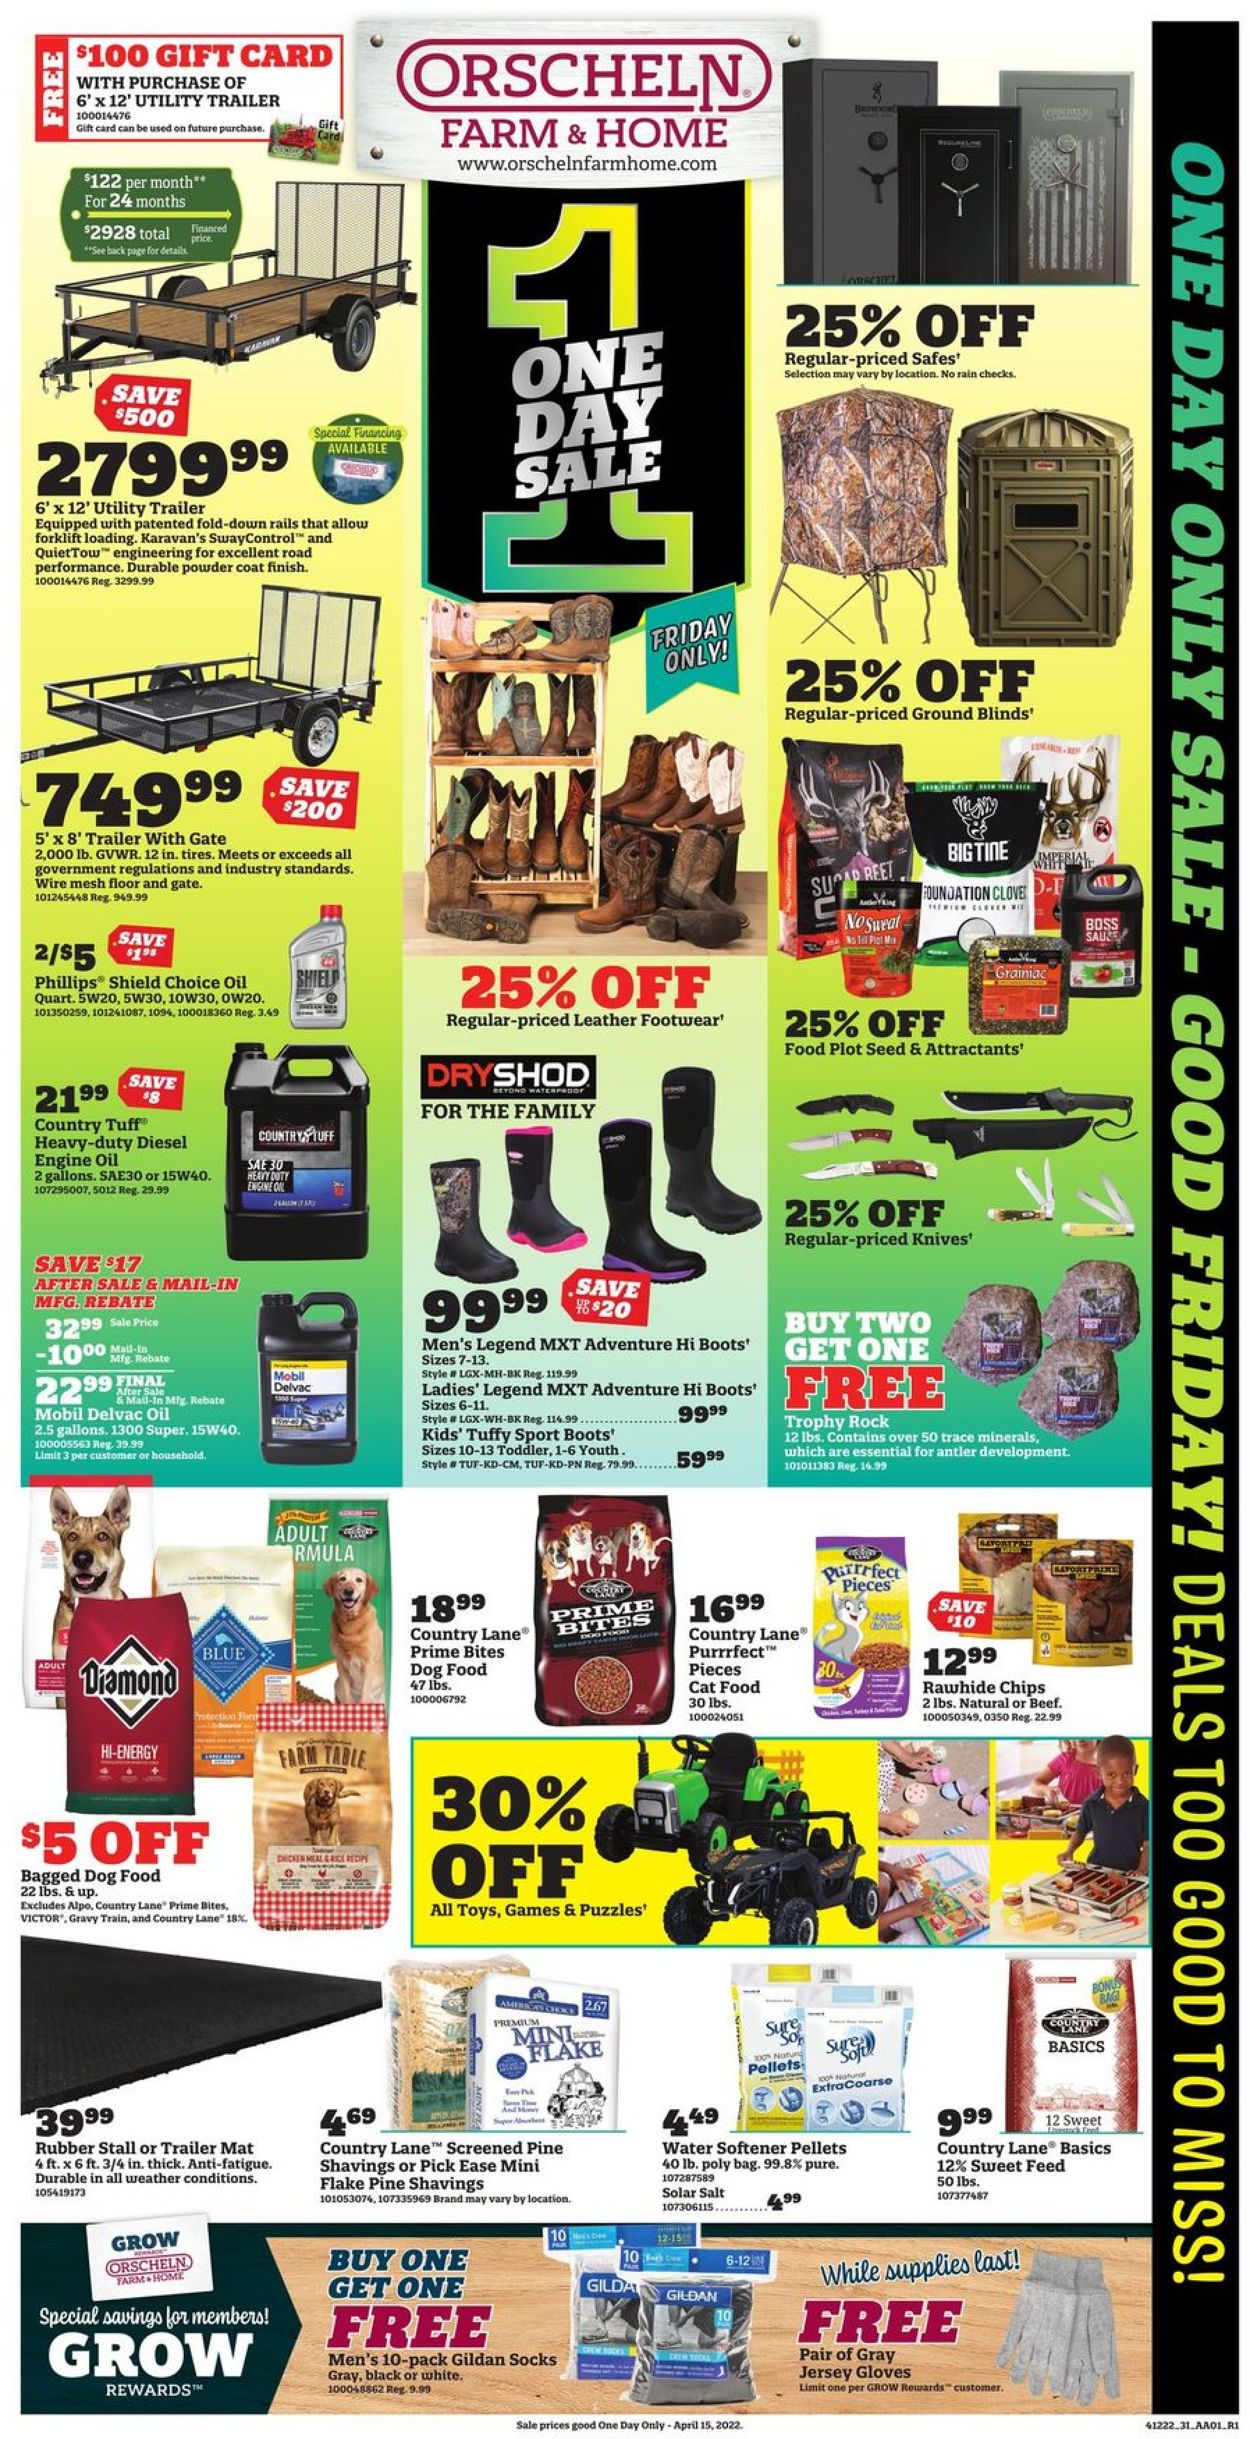 Orscheln Farm and Home EASTER 2022 Weekly Ad Circular - valid 04/15-04/15/2022